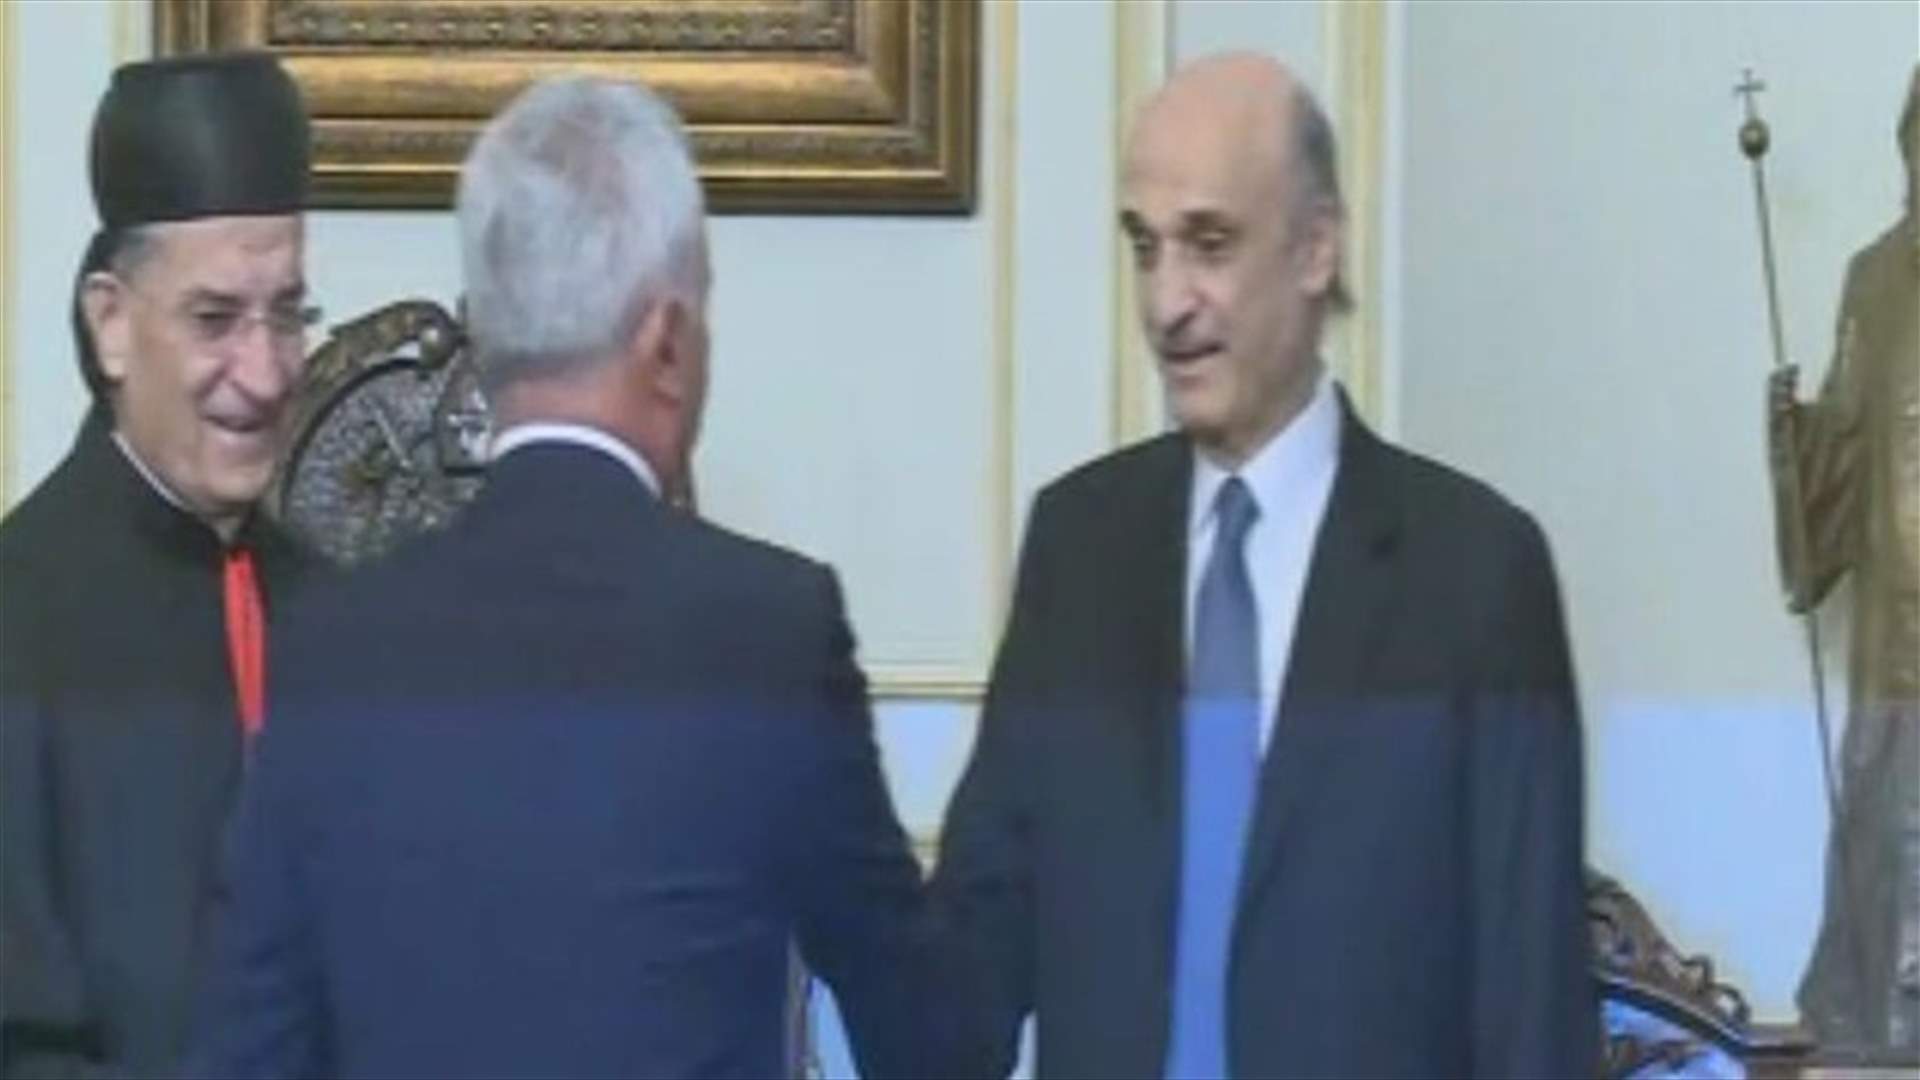 Frangieh and Geagea shake hands before the start of the reconciliation meeting in Bkerke